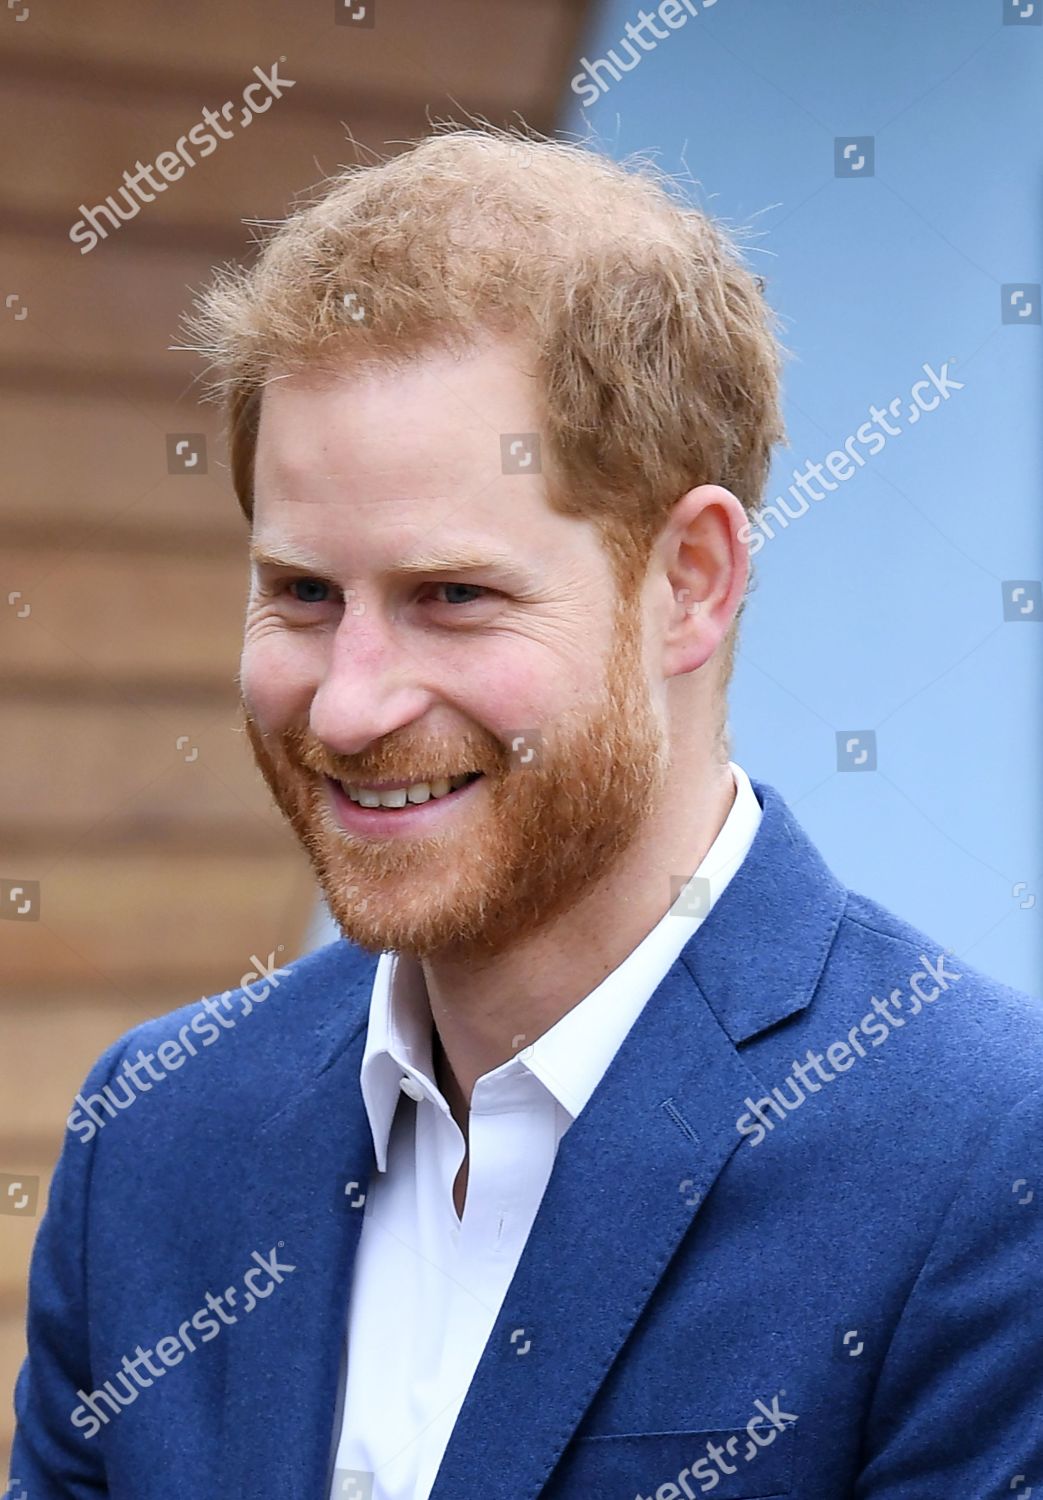 prince-harry-visits-st-vincents-catholic-primary-school-for-commonwealth-canopy-and-woodland-trust-tree-planting-ceremony-london-uk-shutterstock-editorial-10160984i.jpg